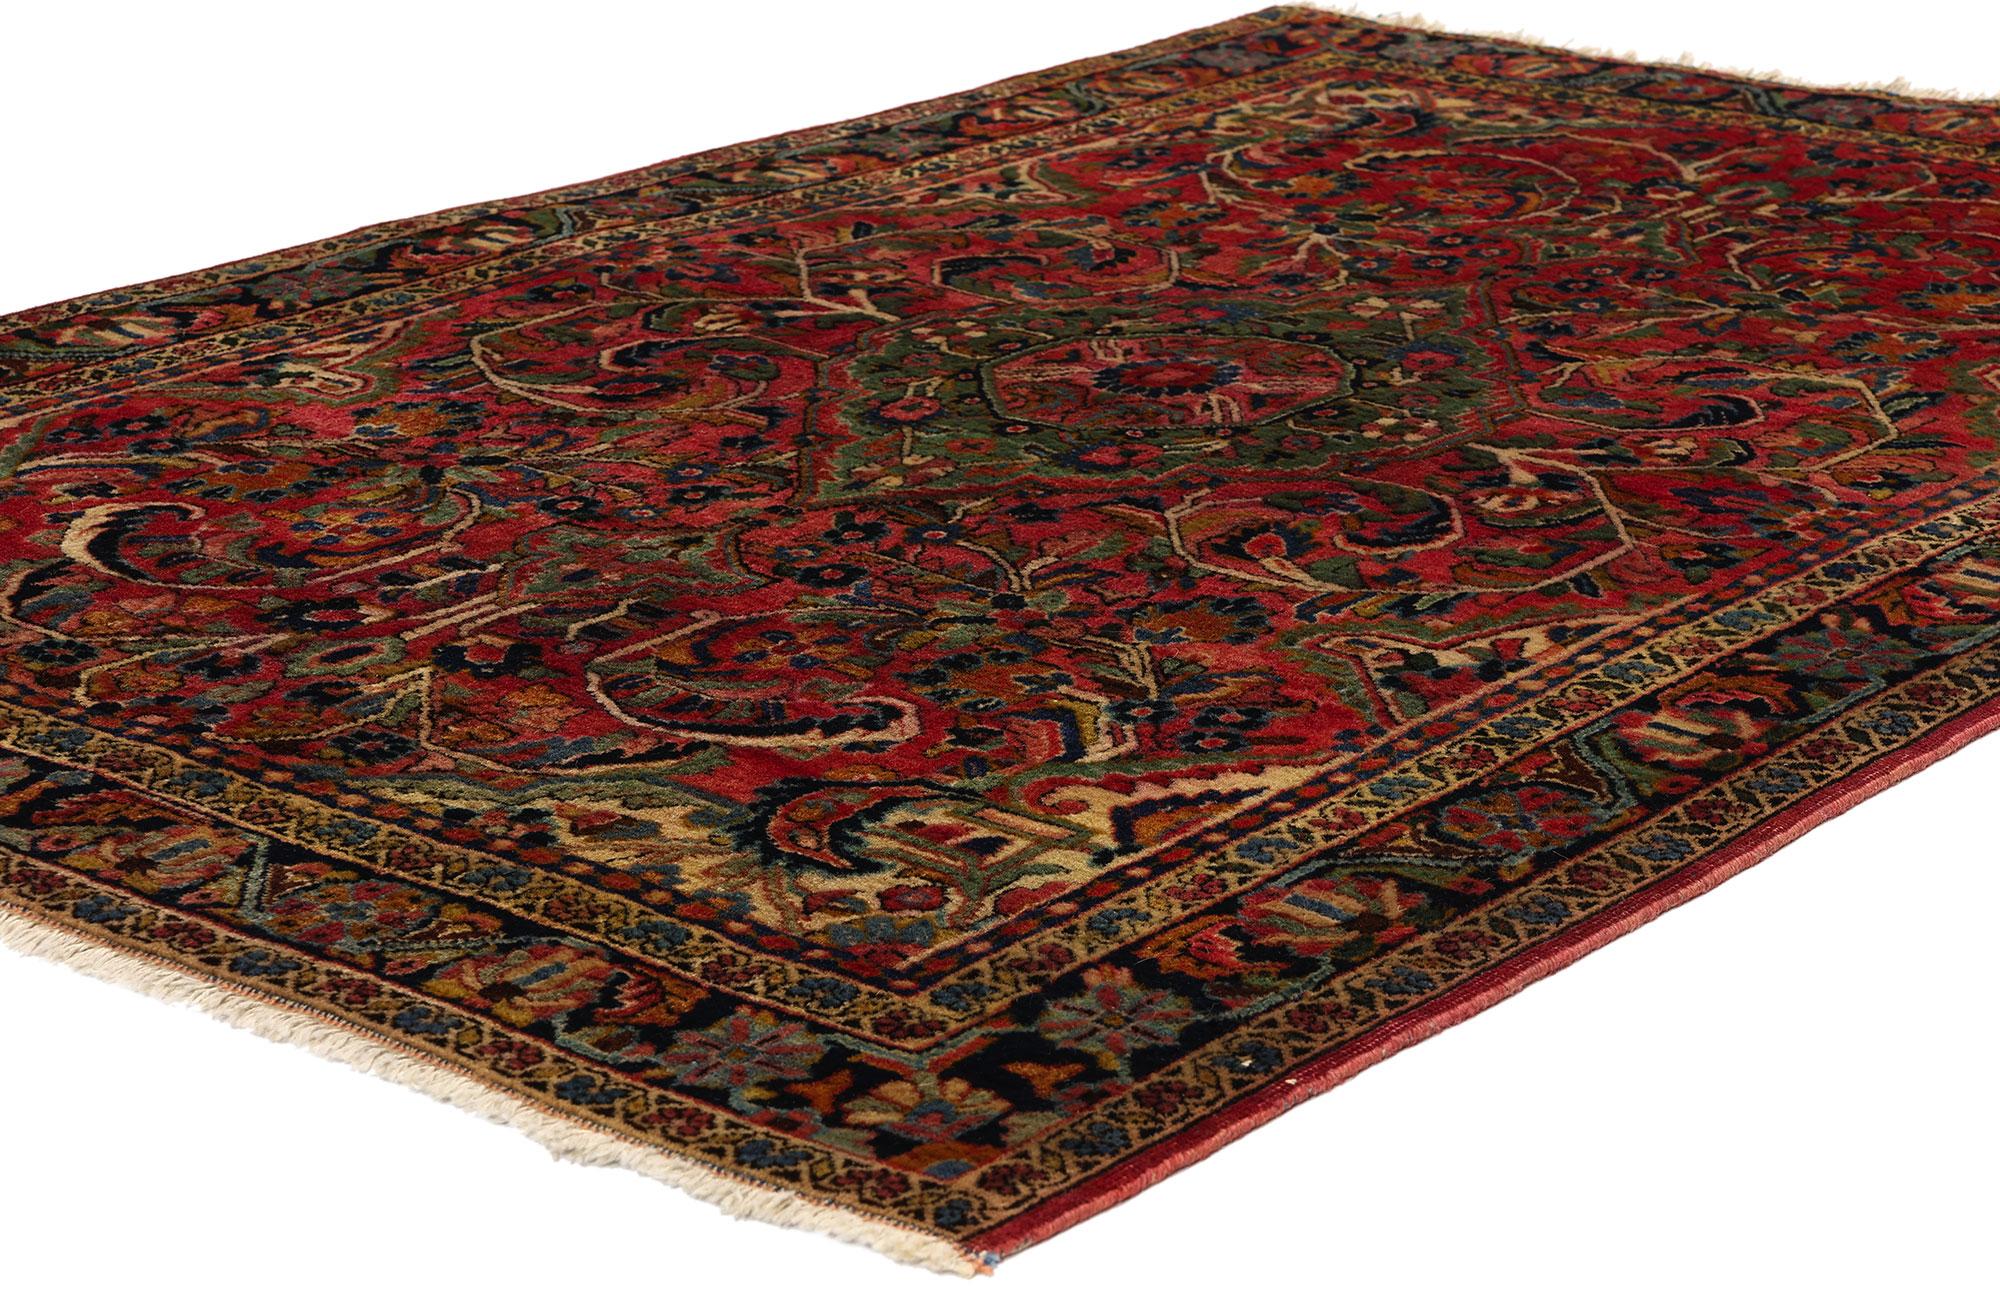 78684 Antique Persian Sarouk Farahan Rug, 03'00 x 05'00. Persian Sarouk Farahan rugs are a specific type of Persian rug originating from the Farahan district within the Sarouk region of Iran. These rugs are renowned for their intricate designs,